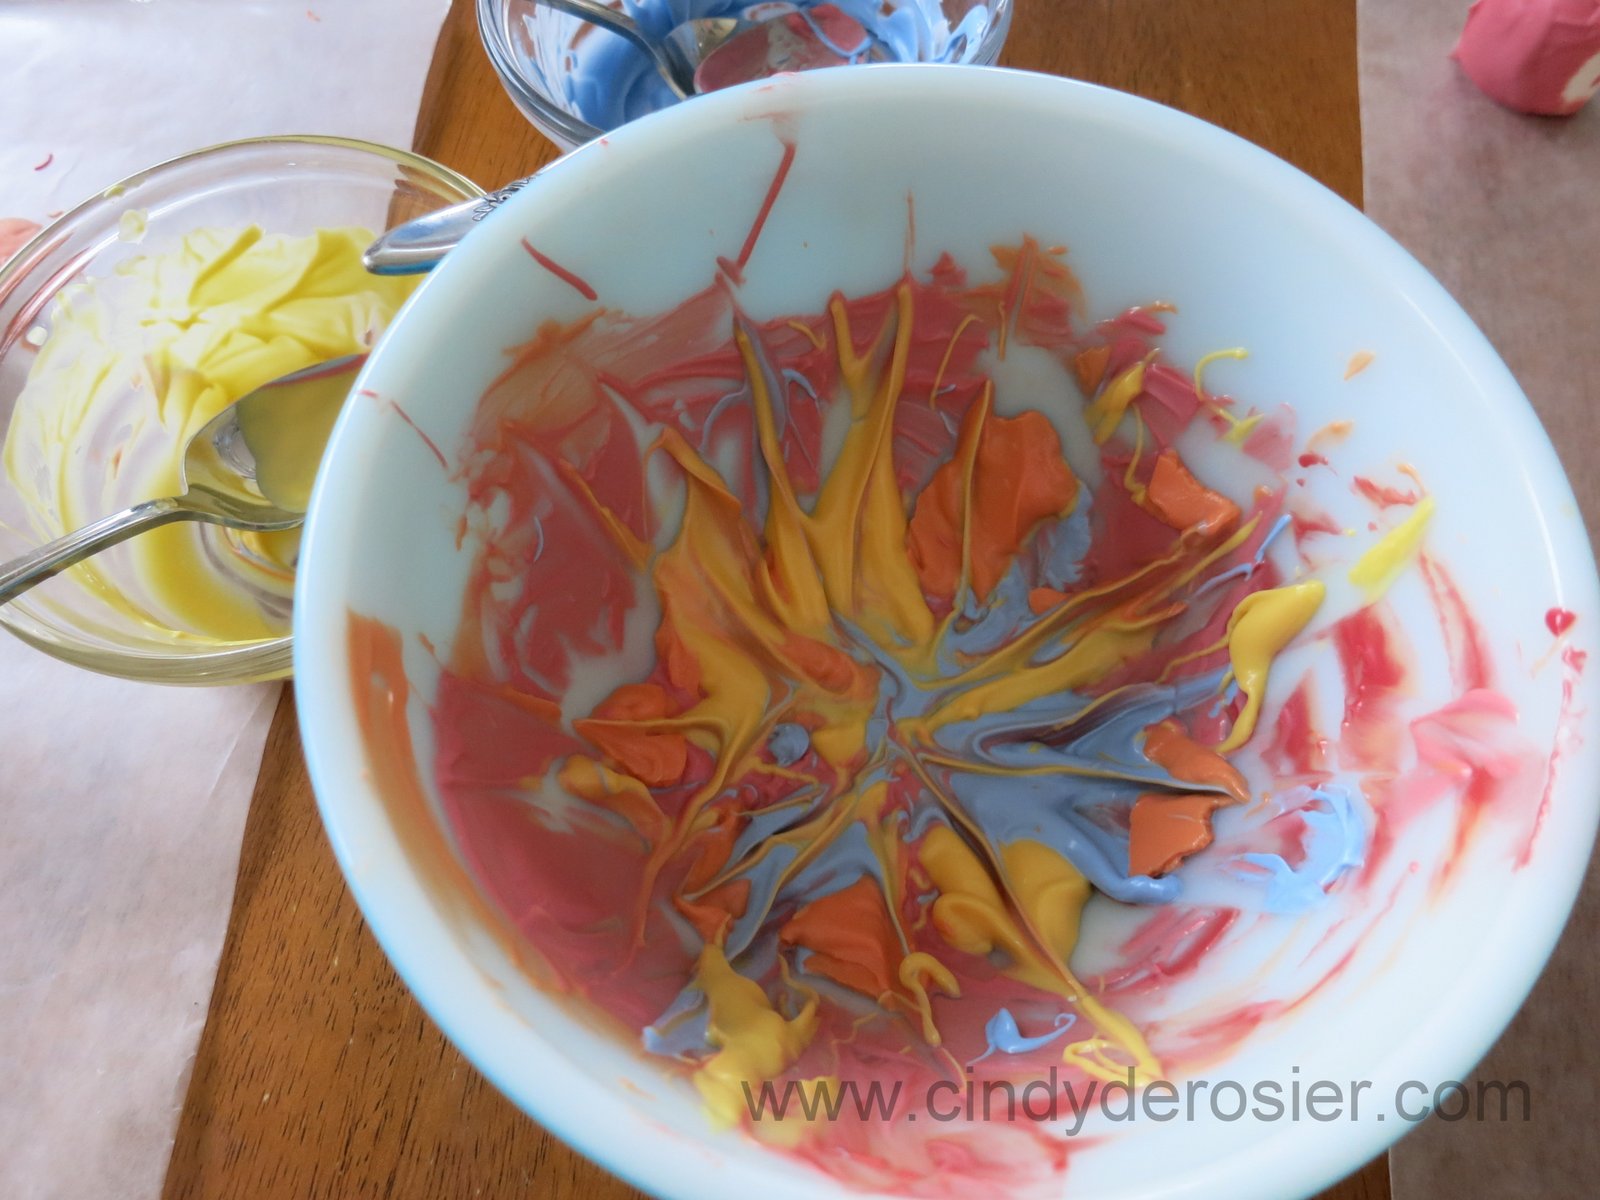 Cindy deRosier: My Creative Life: Marbled Candy Melts and an